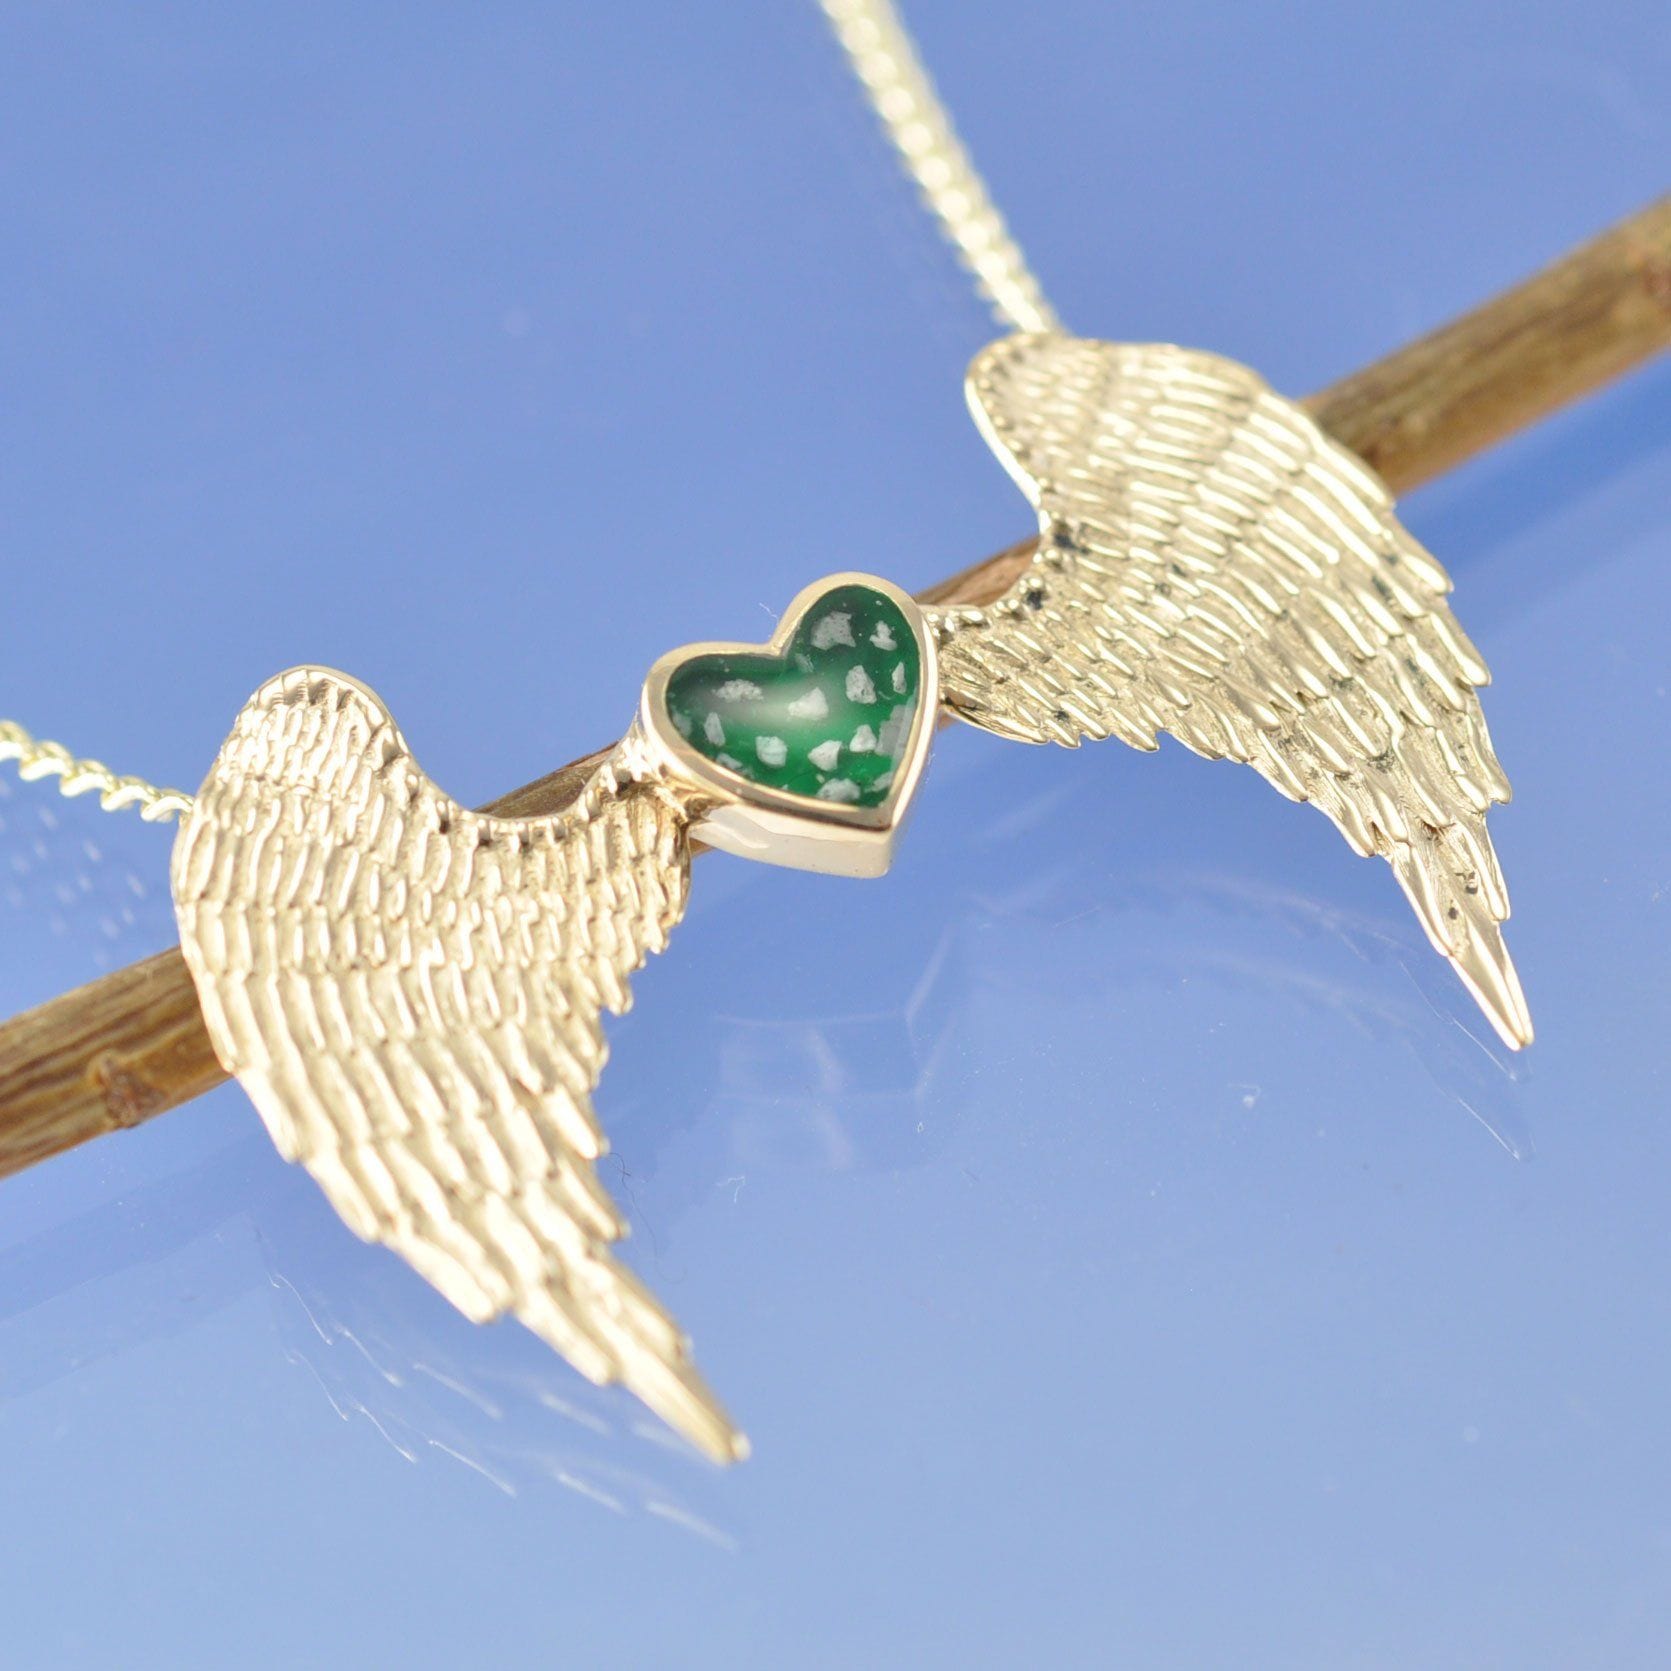 Cremation Ash Heart with Angel Wings Necklace Pendant by Chris Parry Jewellery